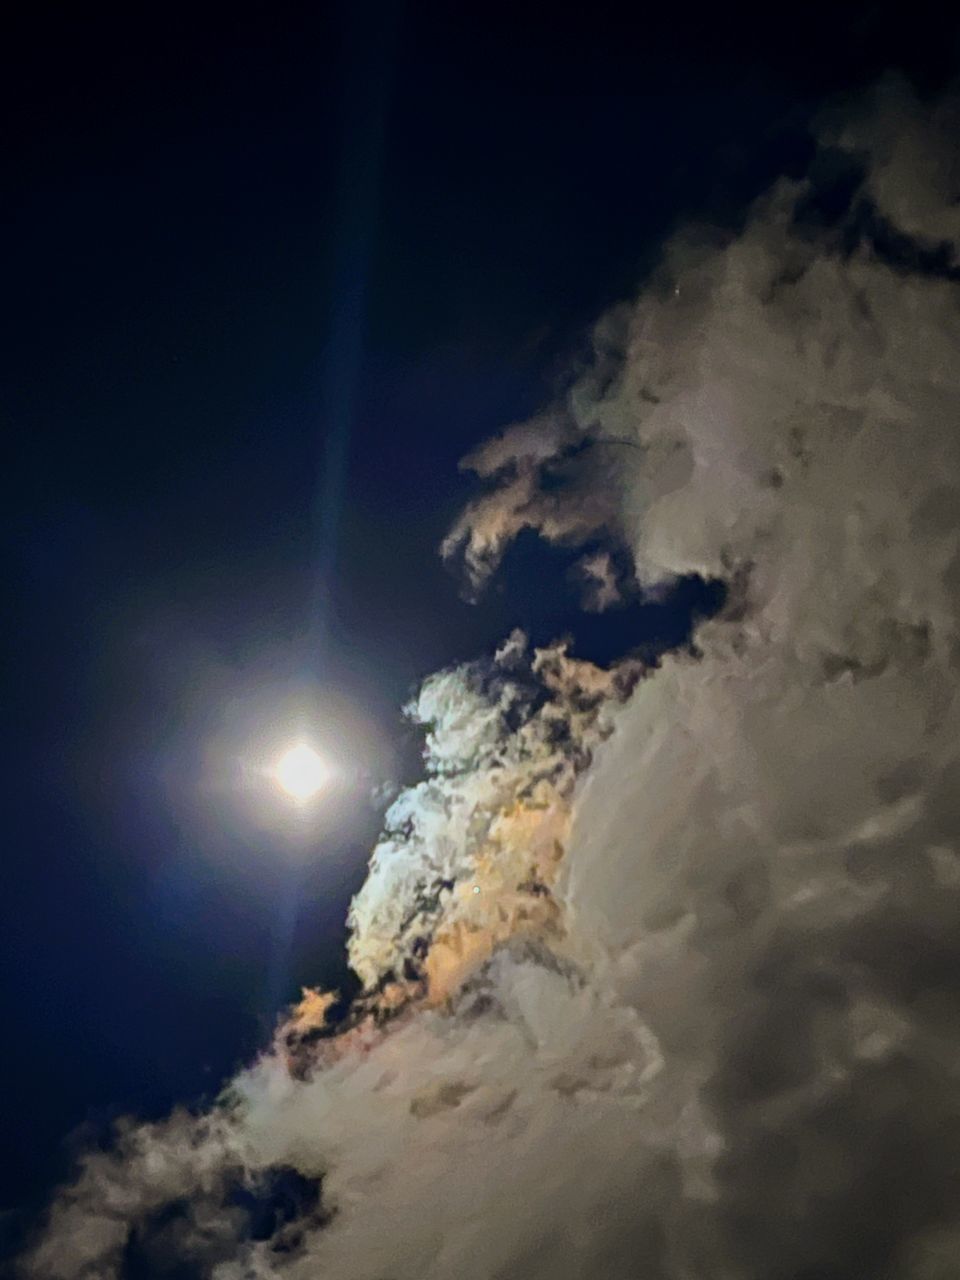 sky, cloud, nature, night, beauty in nature, astronomical object, light, moon, scenics - nature, no people, outer space, snow, environment, illuminated, cold temperature, outdoors, winter, mountain, earth, low angle view, space, darkness, tranquility